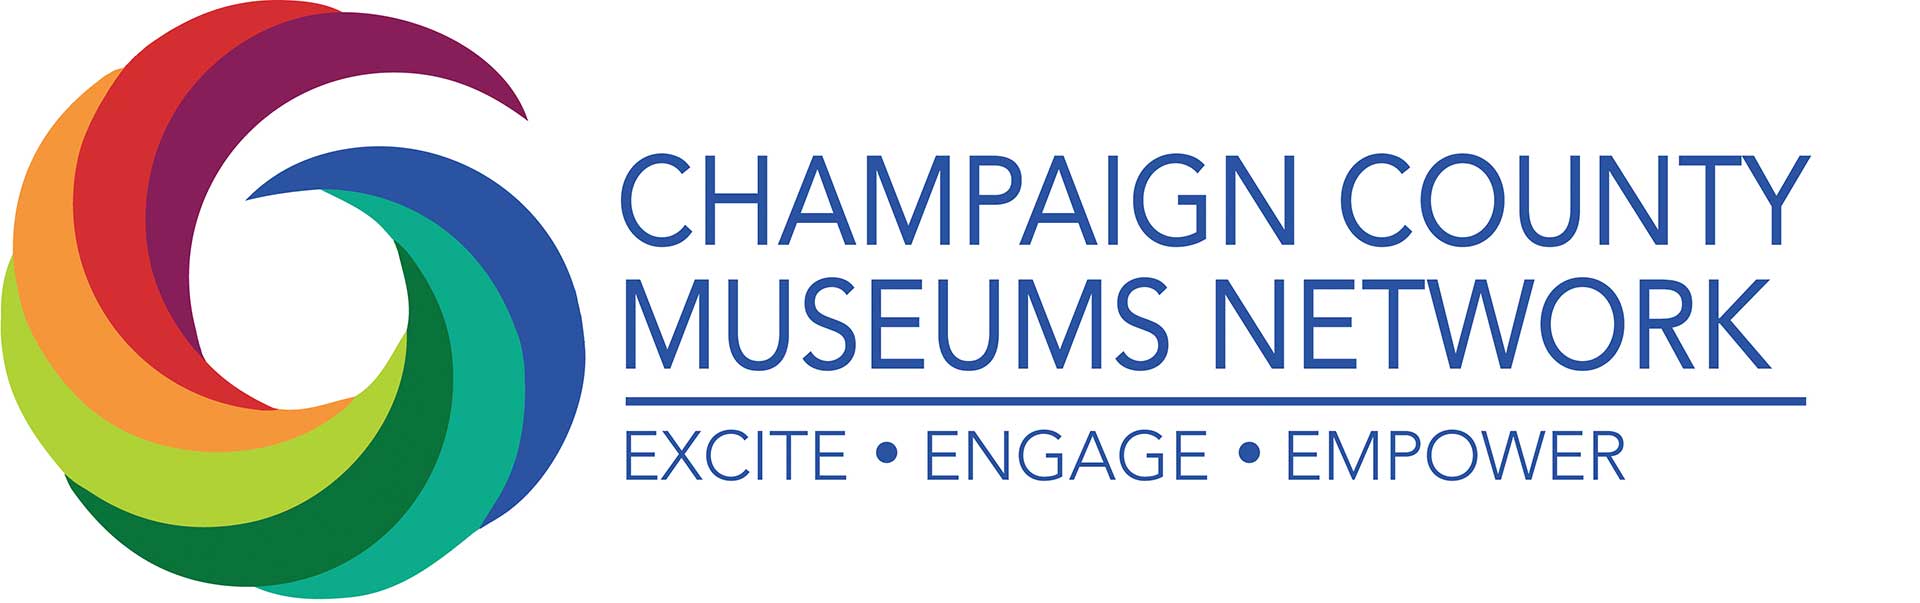 Champaign County Museums Network: Excite, Engage, Empower